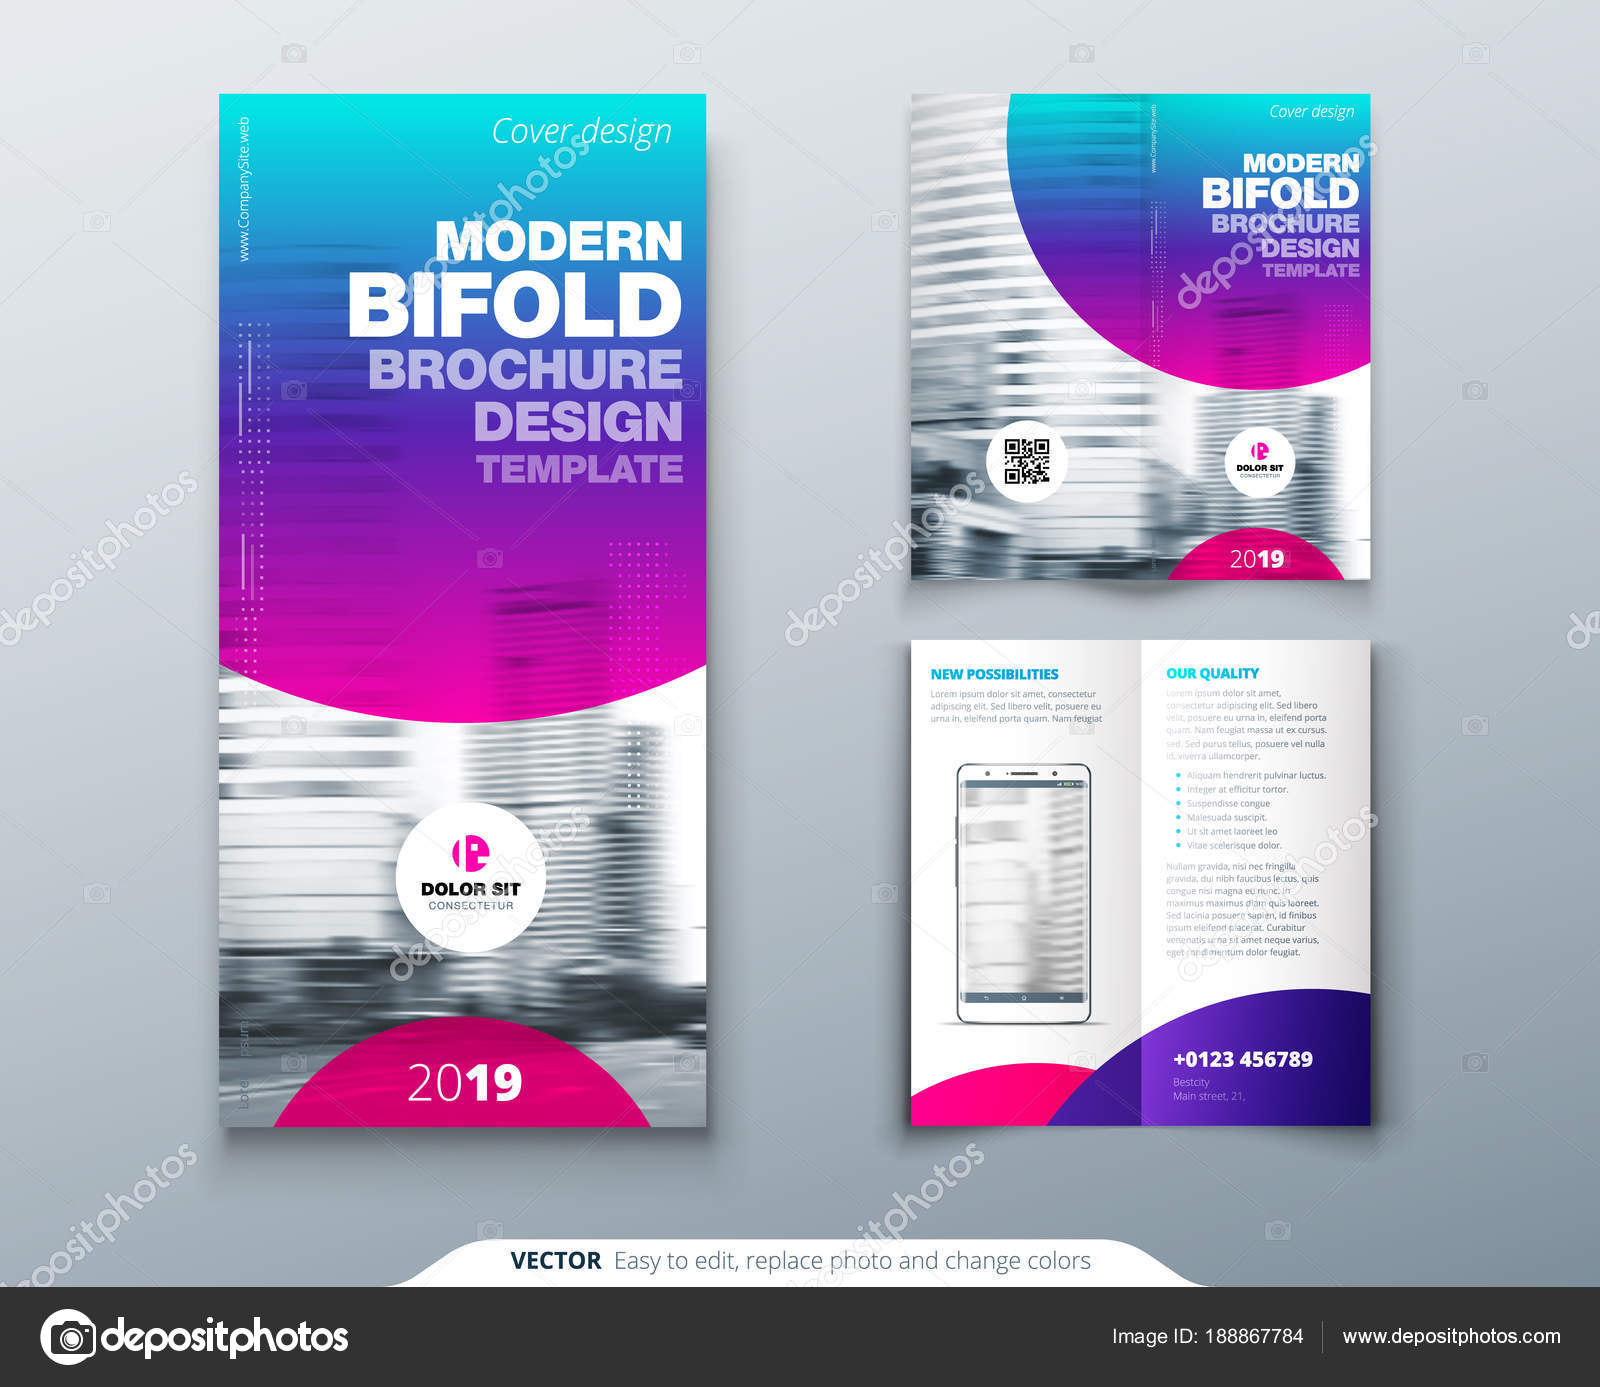 Product Brochure Design Ideas Tri Fold Brochure Design Cool Business Template For Tri Fold Flyer Layout With Modern Circle Photo And Abstract Background Creative 3 Folded Flyer Or Brochure Concept